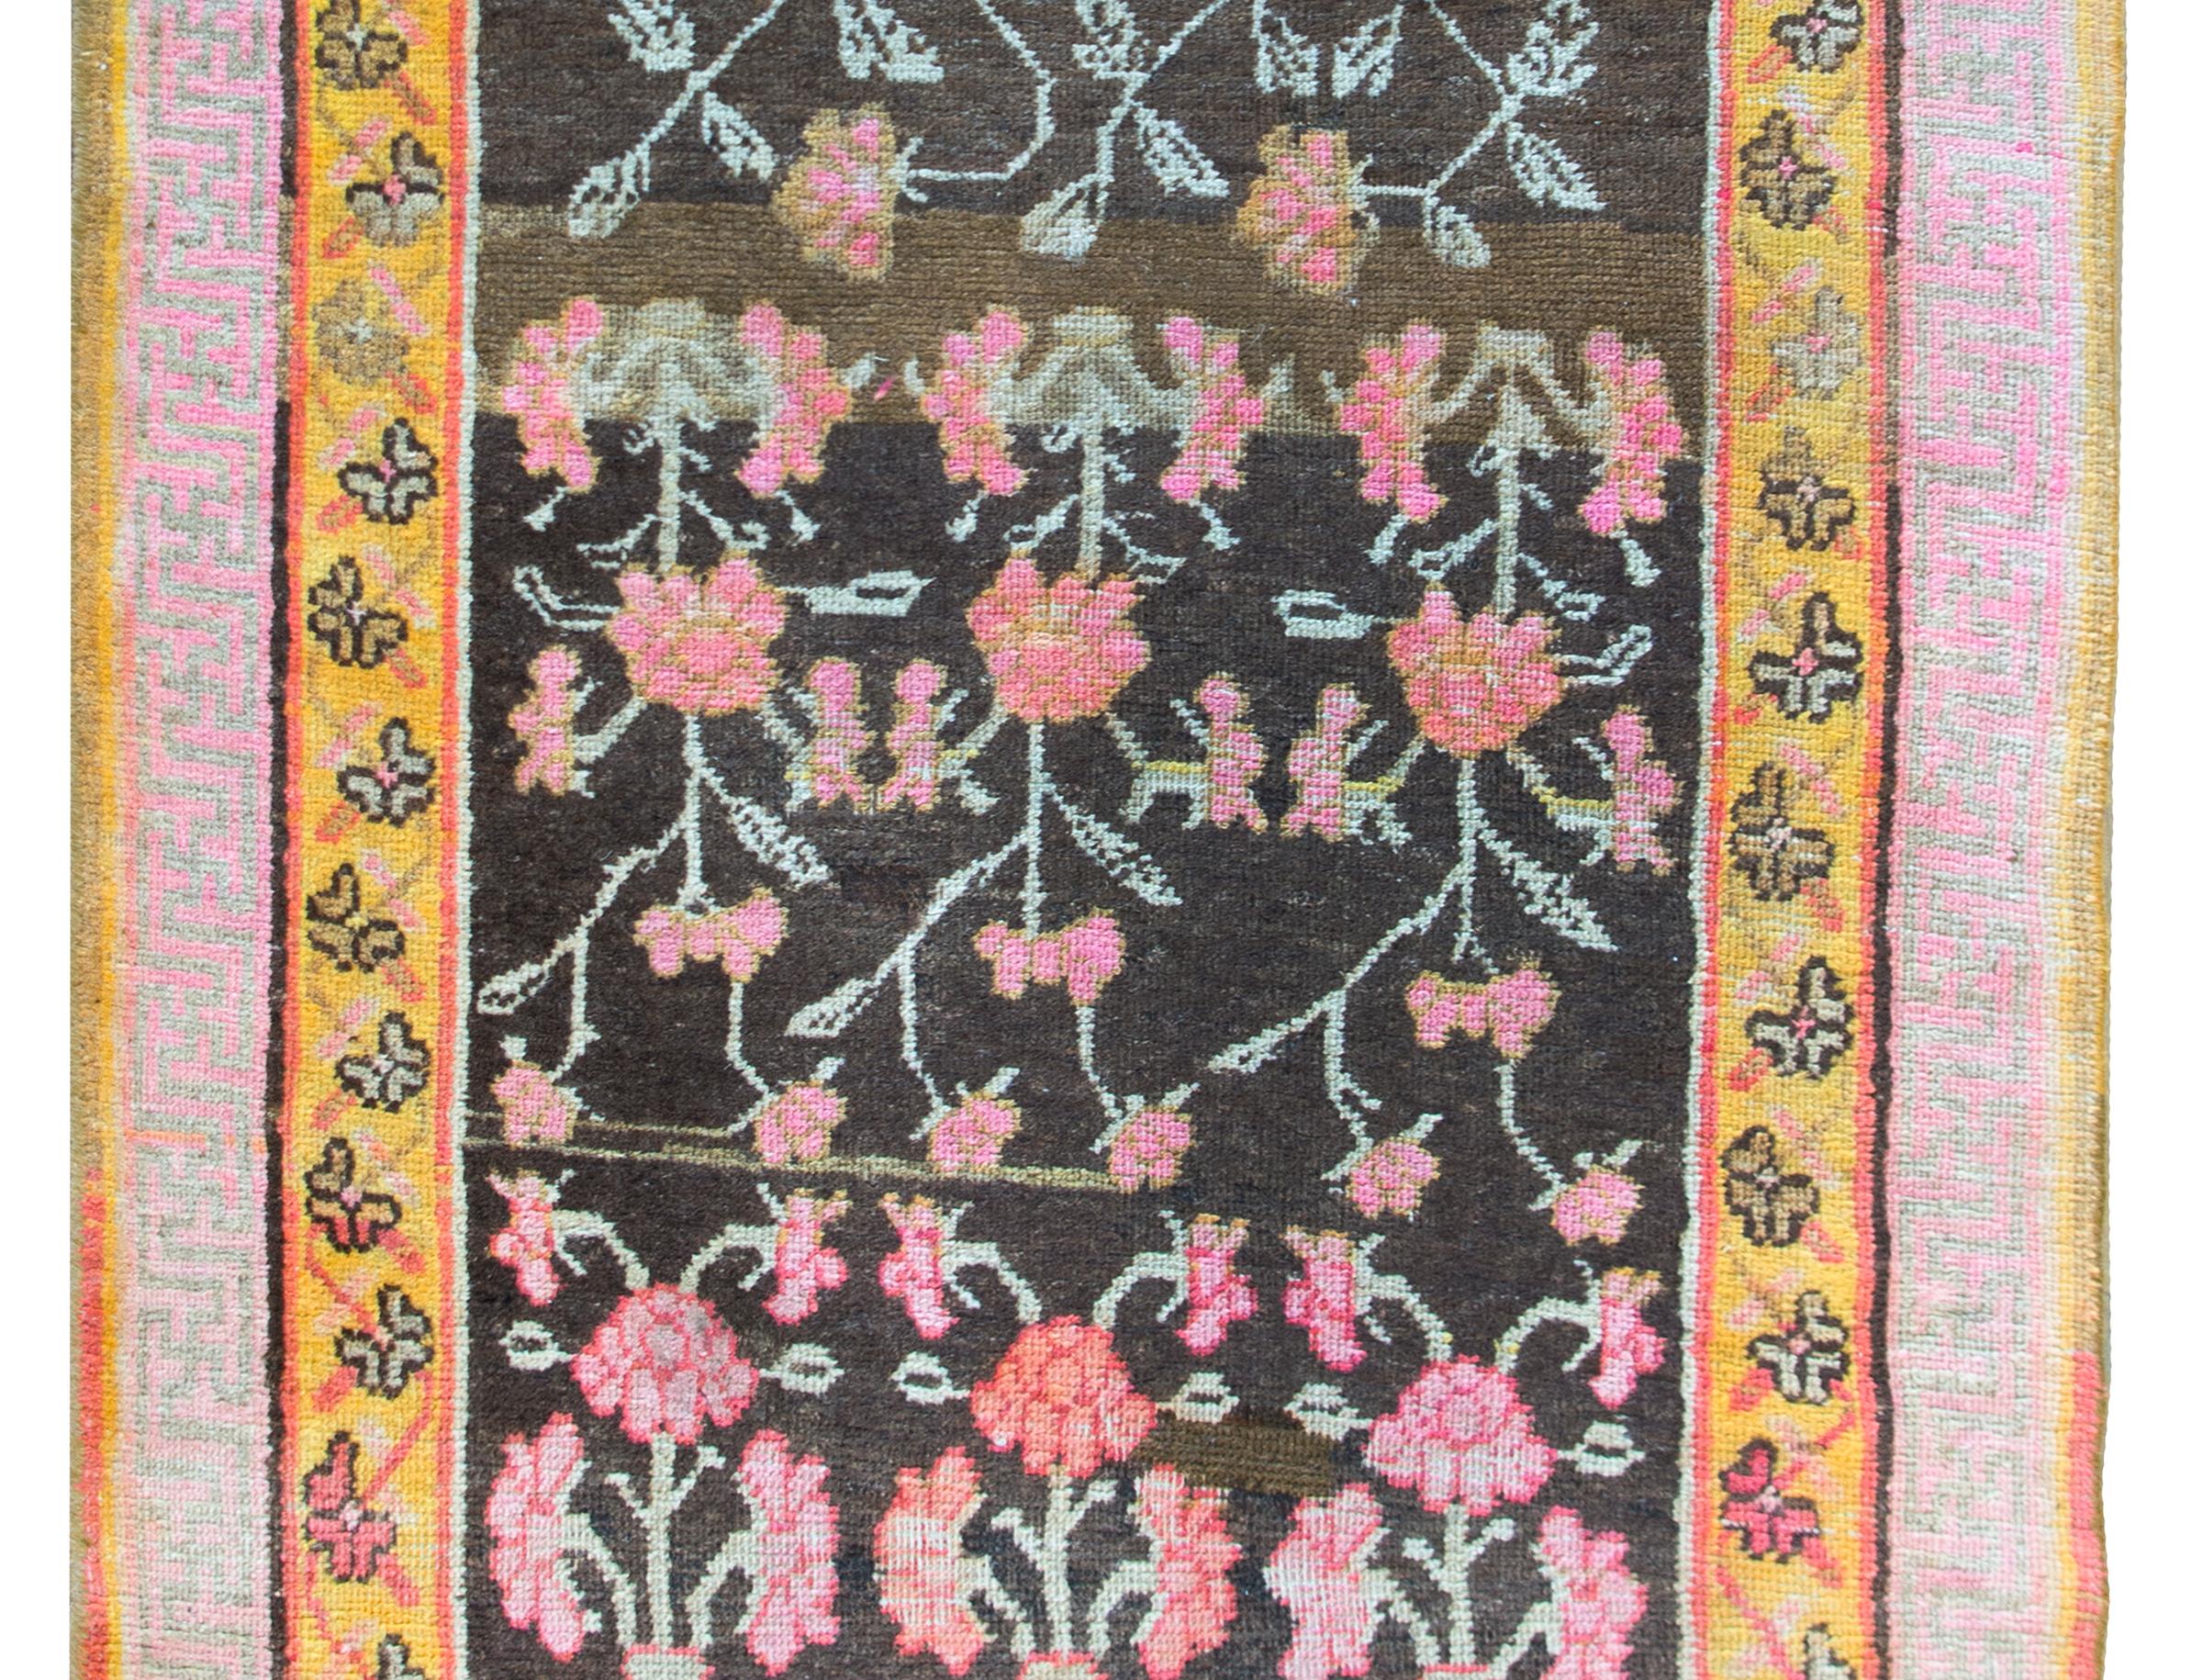 A charming and whimsical early 20th century Central Asian Khotan Rug with an all-over pink peony pattern with two larger peonies at the bottom. The border is sweet with a petite floral and scrolling vine patterned inner border and a meandering motif